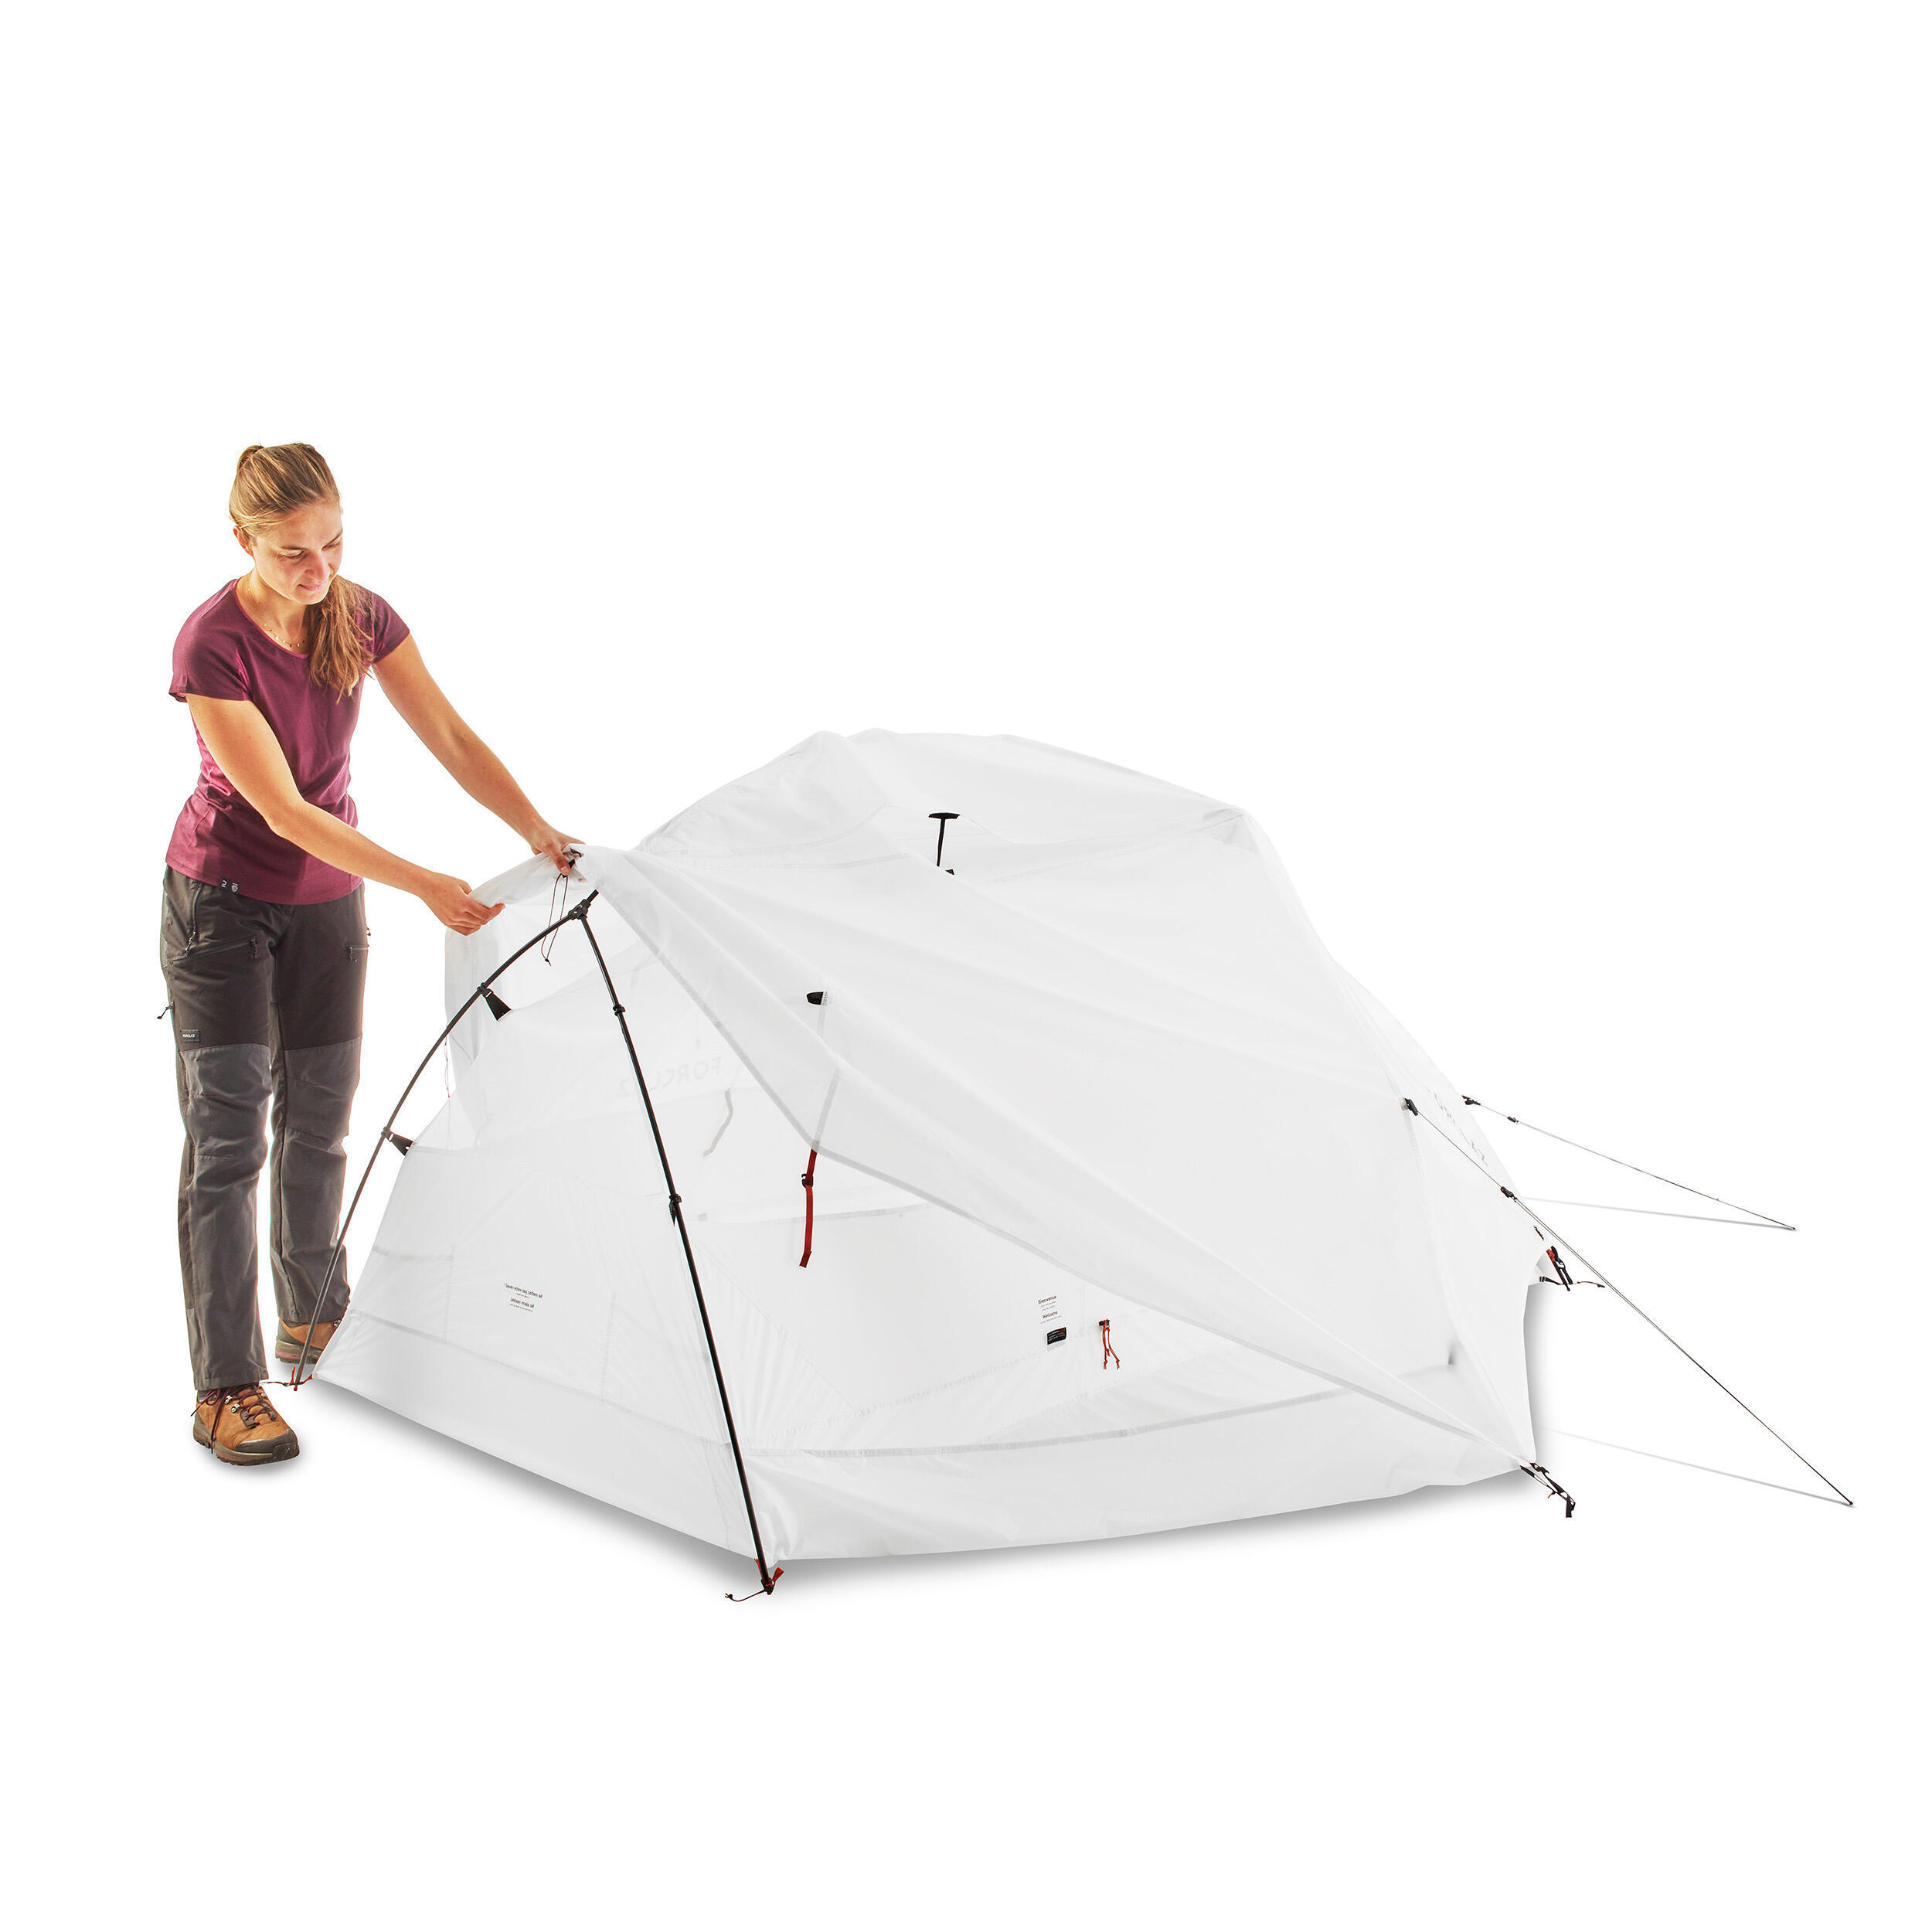 Trekking dome tent - 2-person - MT900 Minimal Editions 6/11